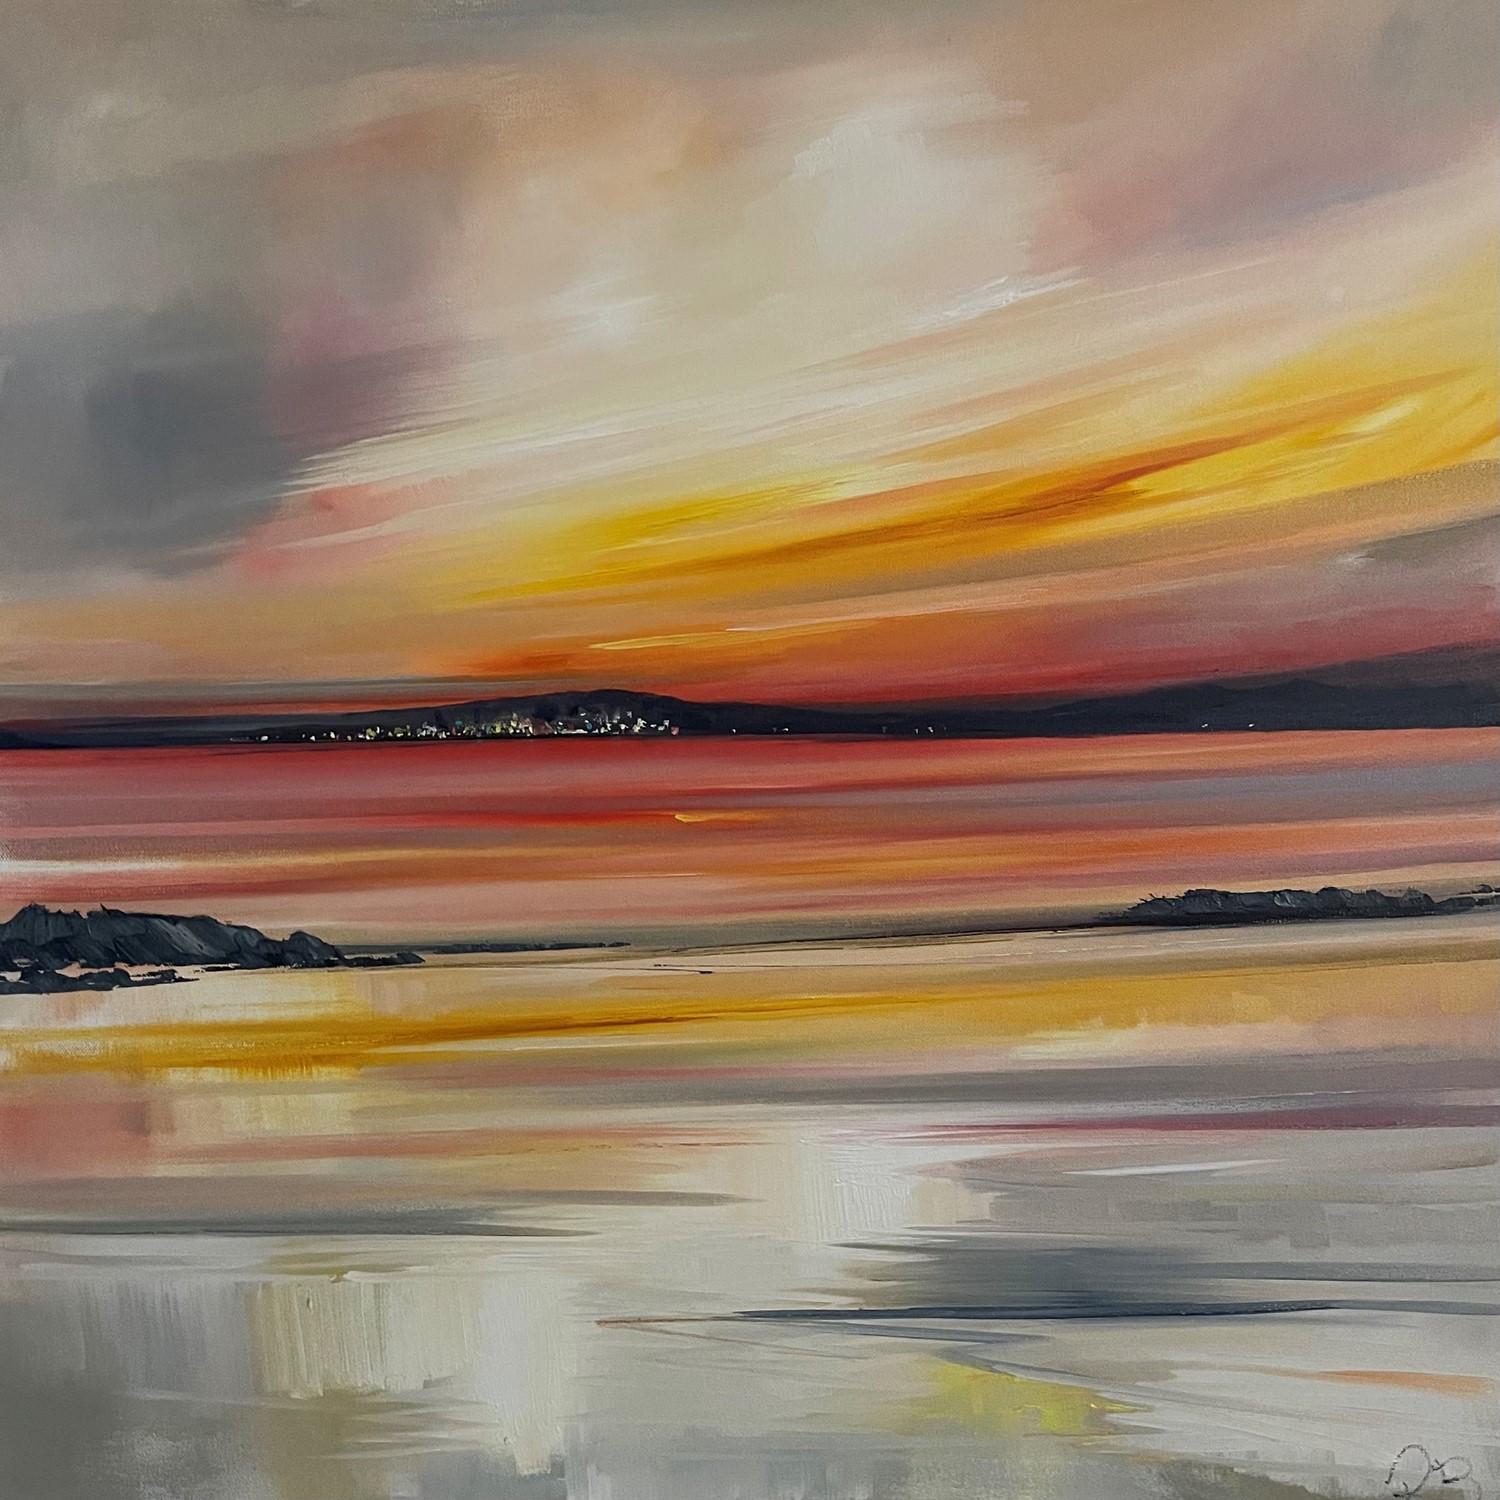 'The Isles from the mainland ' by artist Rosanne Barr